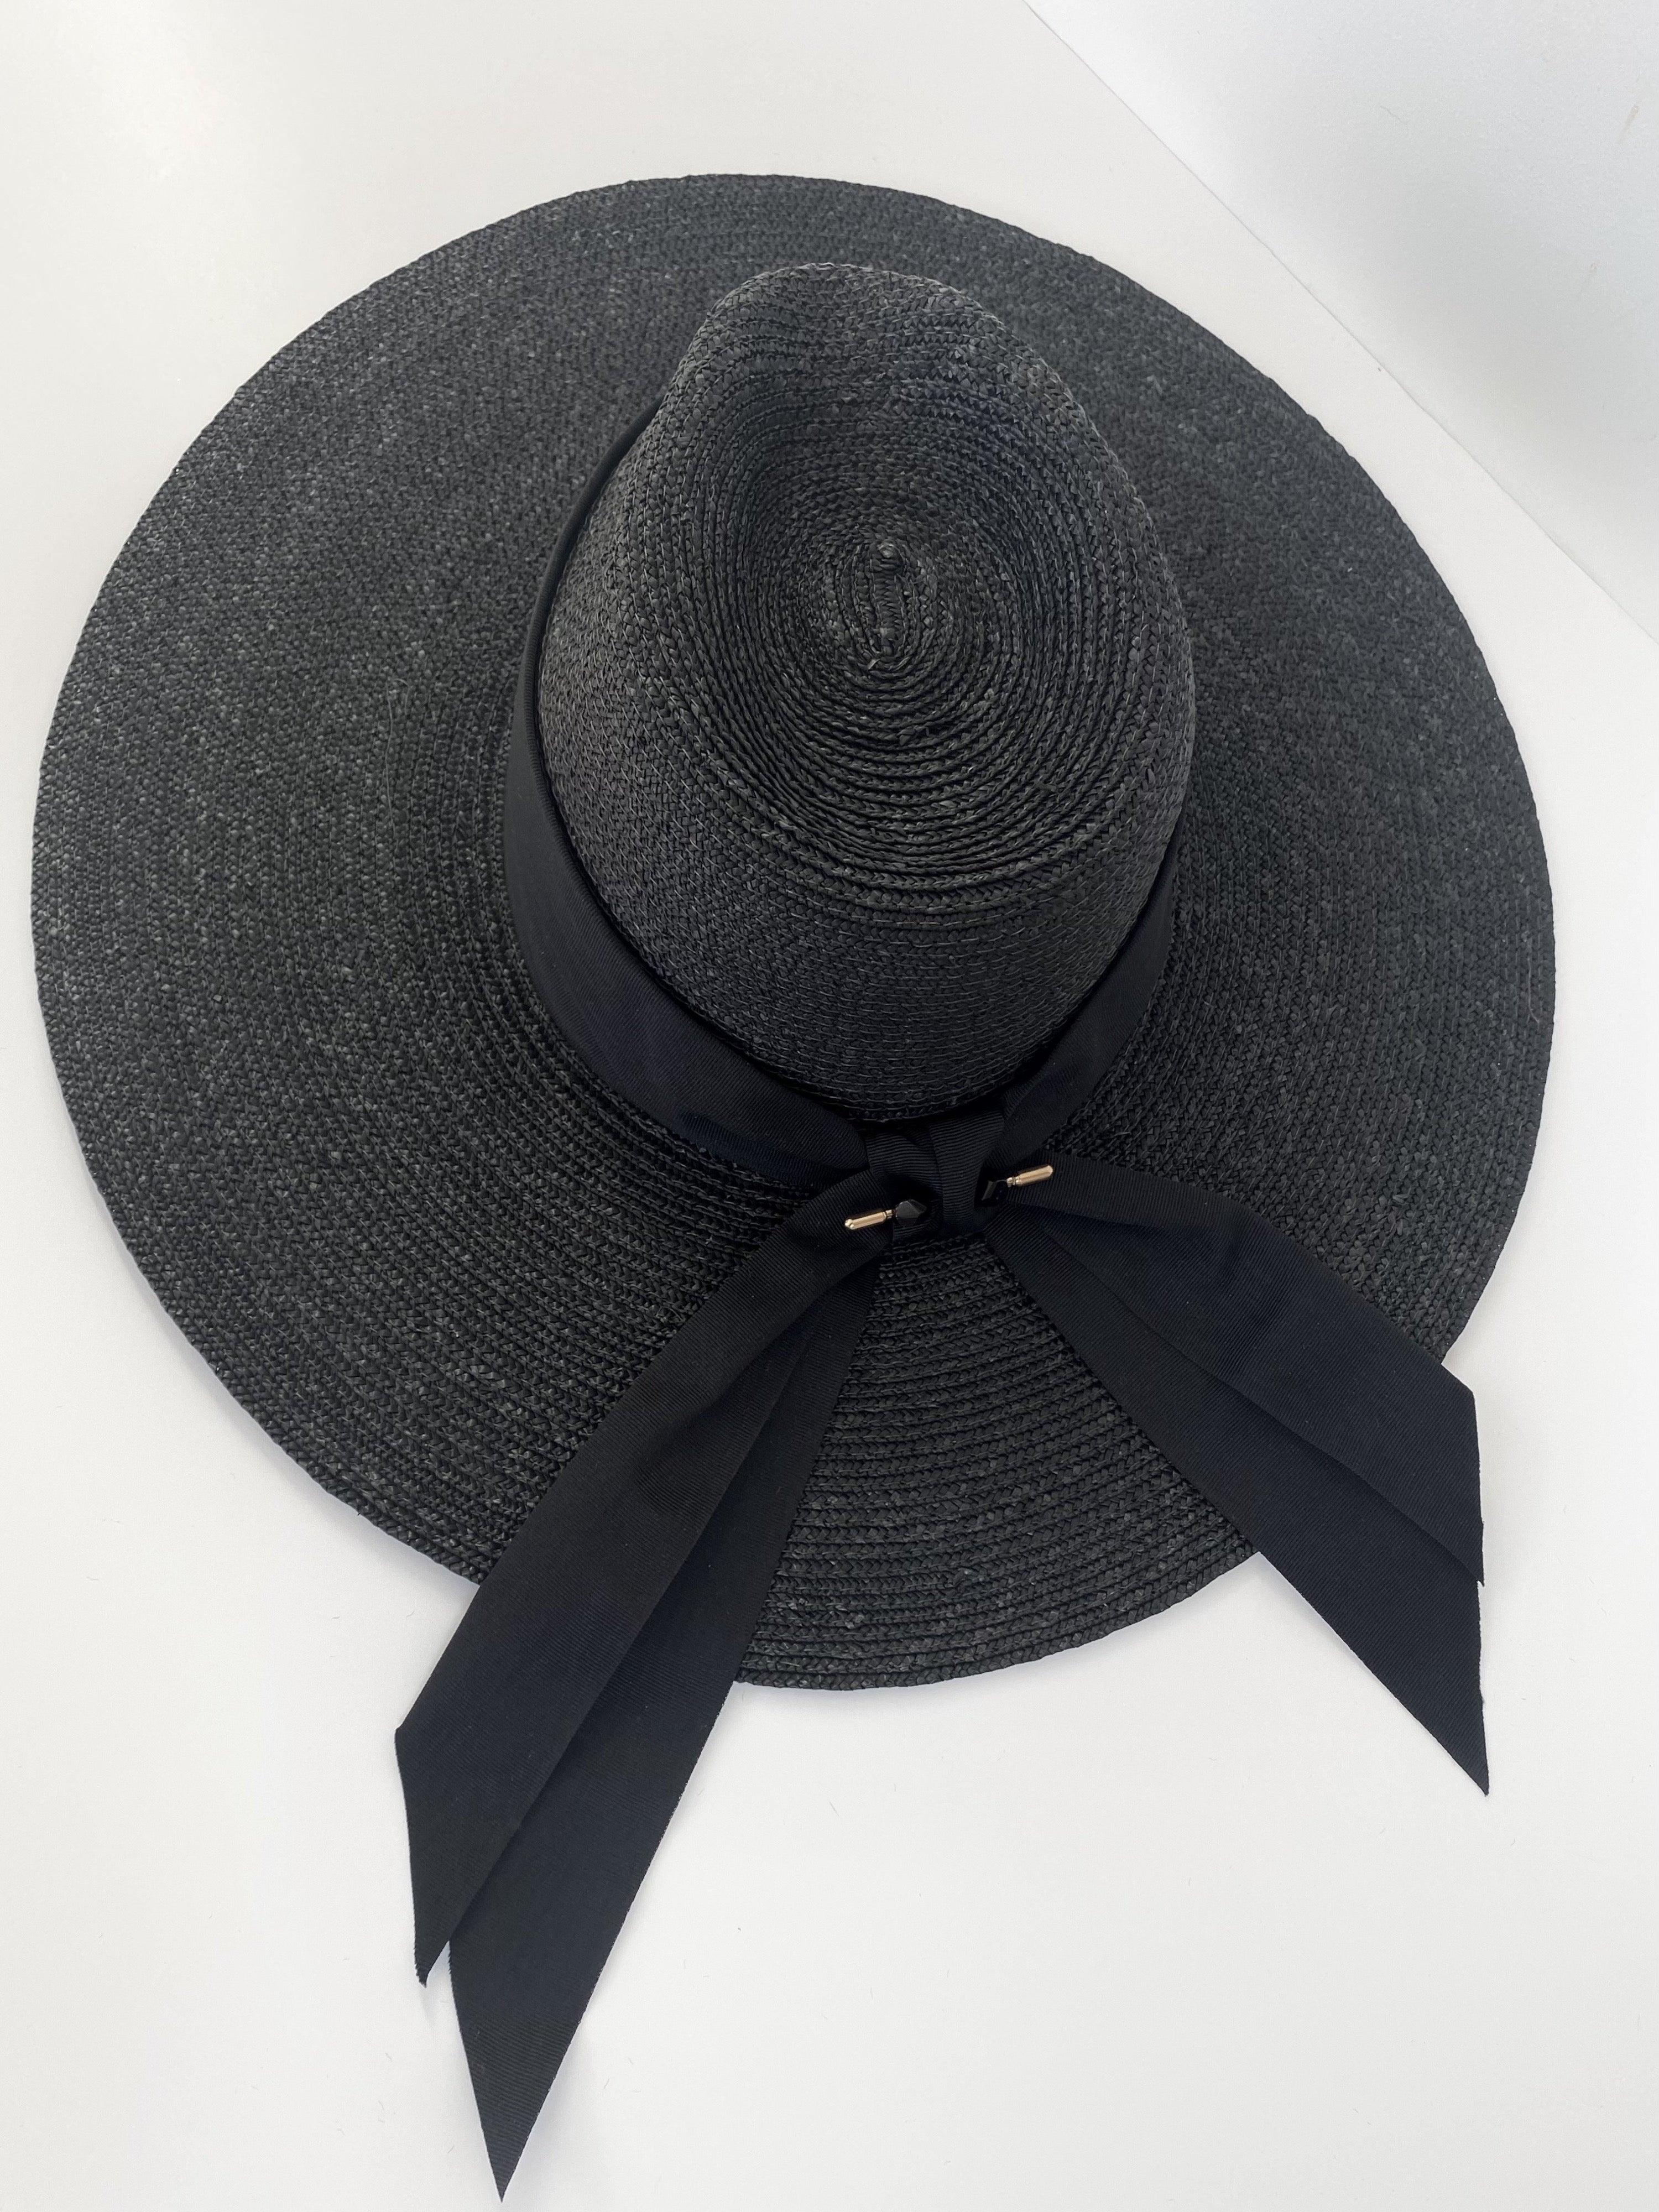 large black wide brimmed sun hat with large ribbon at back. Moira Schitts creek